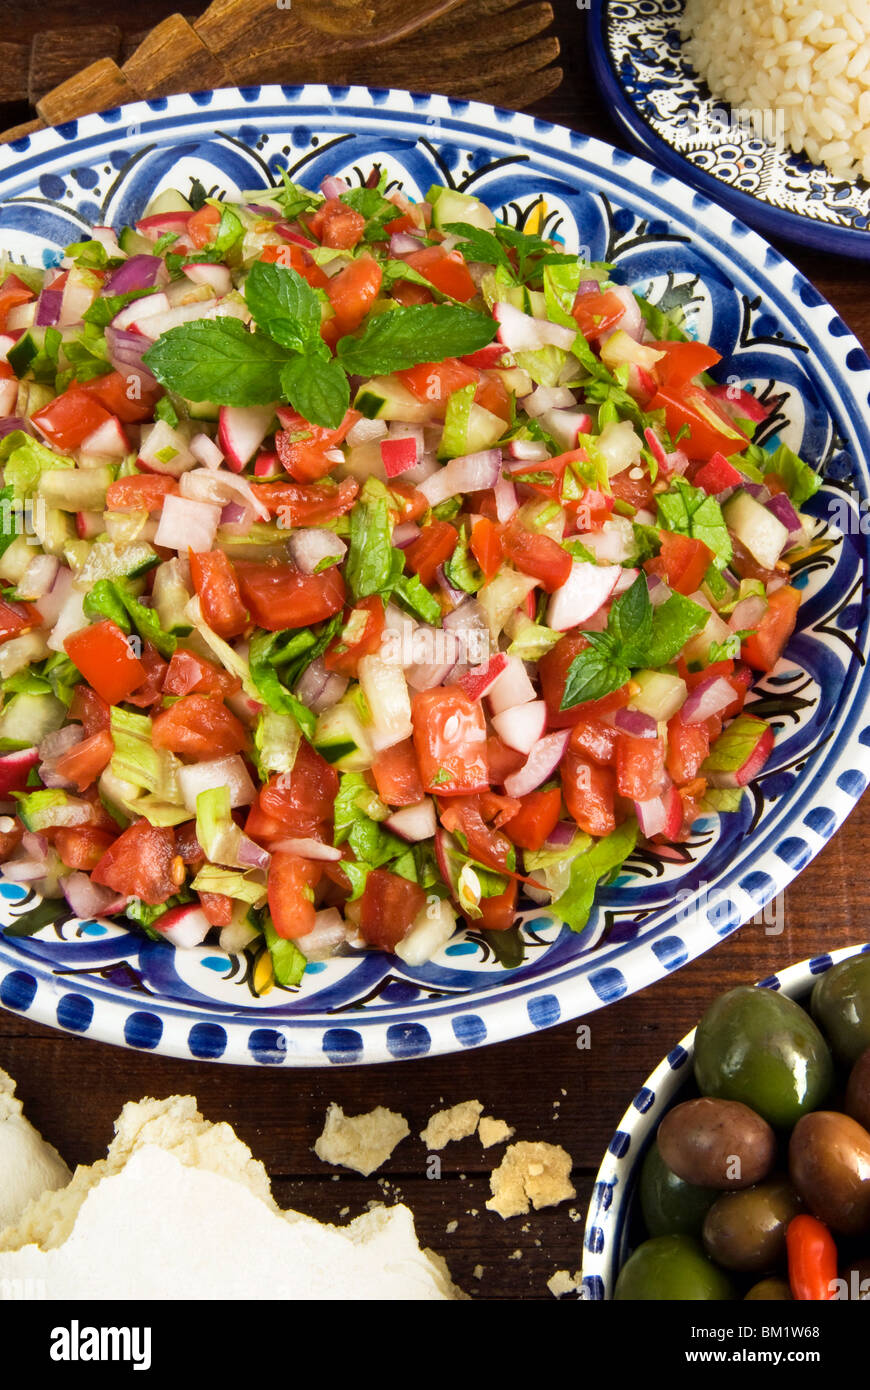 Egyptian salad, Middle Eastern food, Egypt, North Africa, Africa Stock Photo